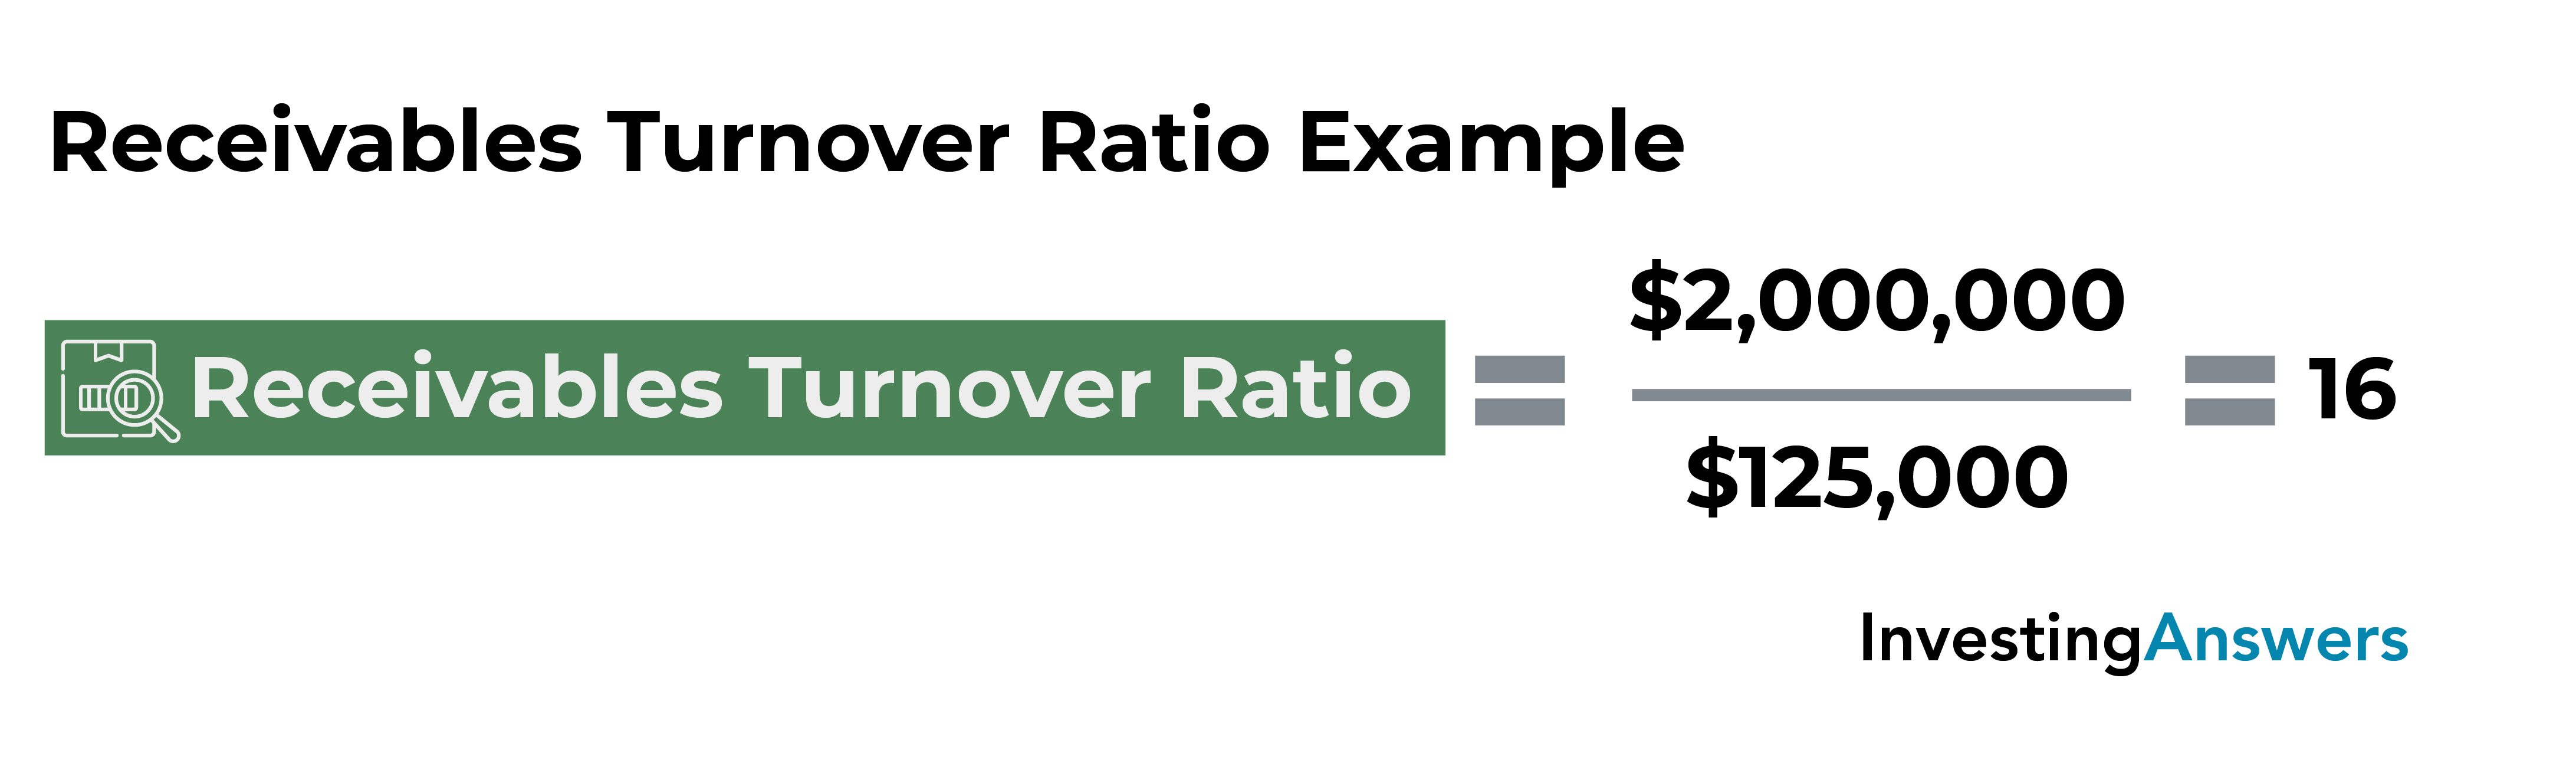 receivables turnover ratio example